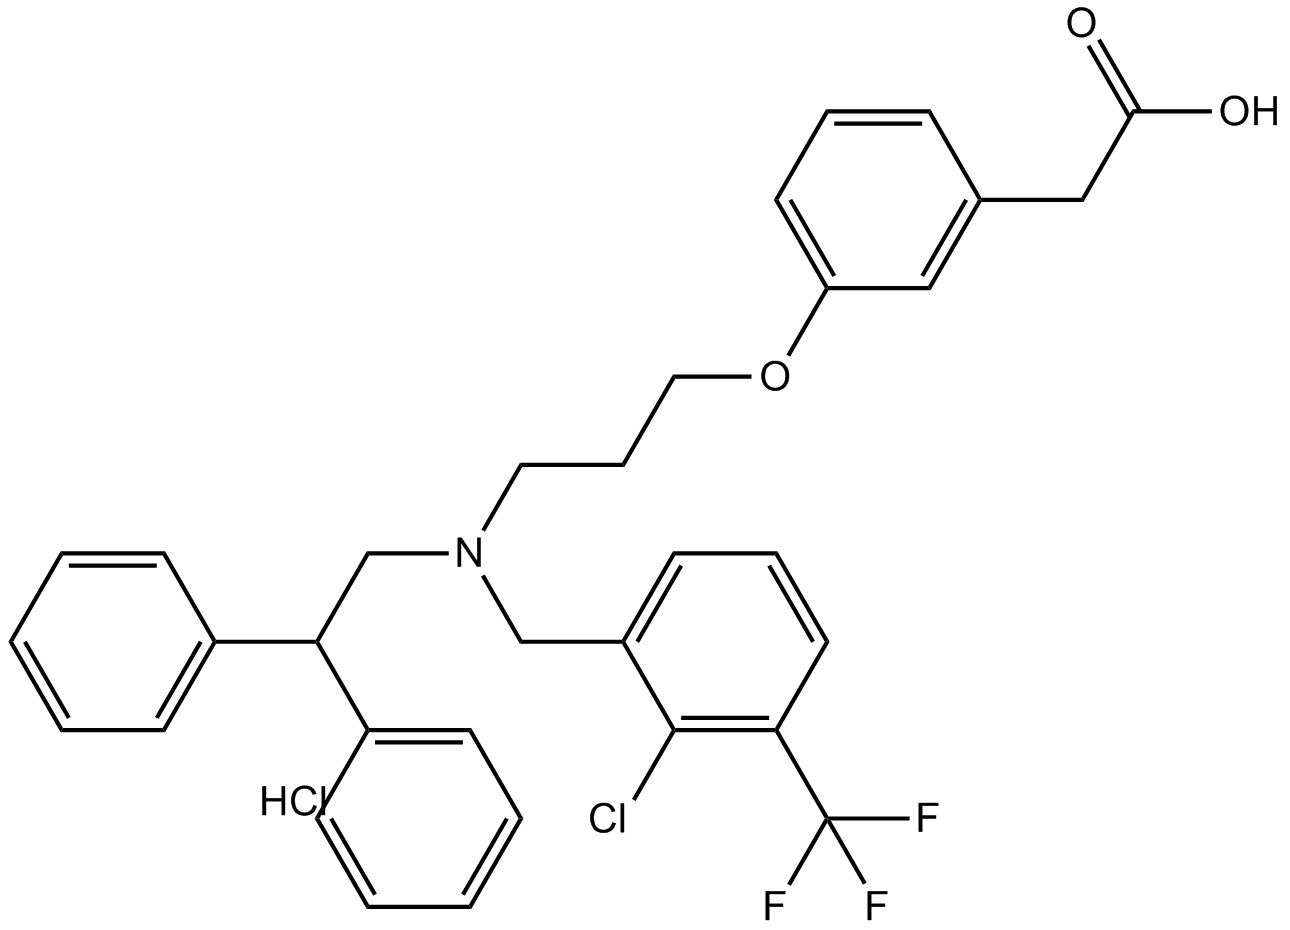 GW3965 HCl  Chemical Structure